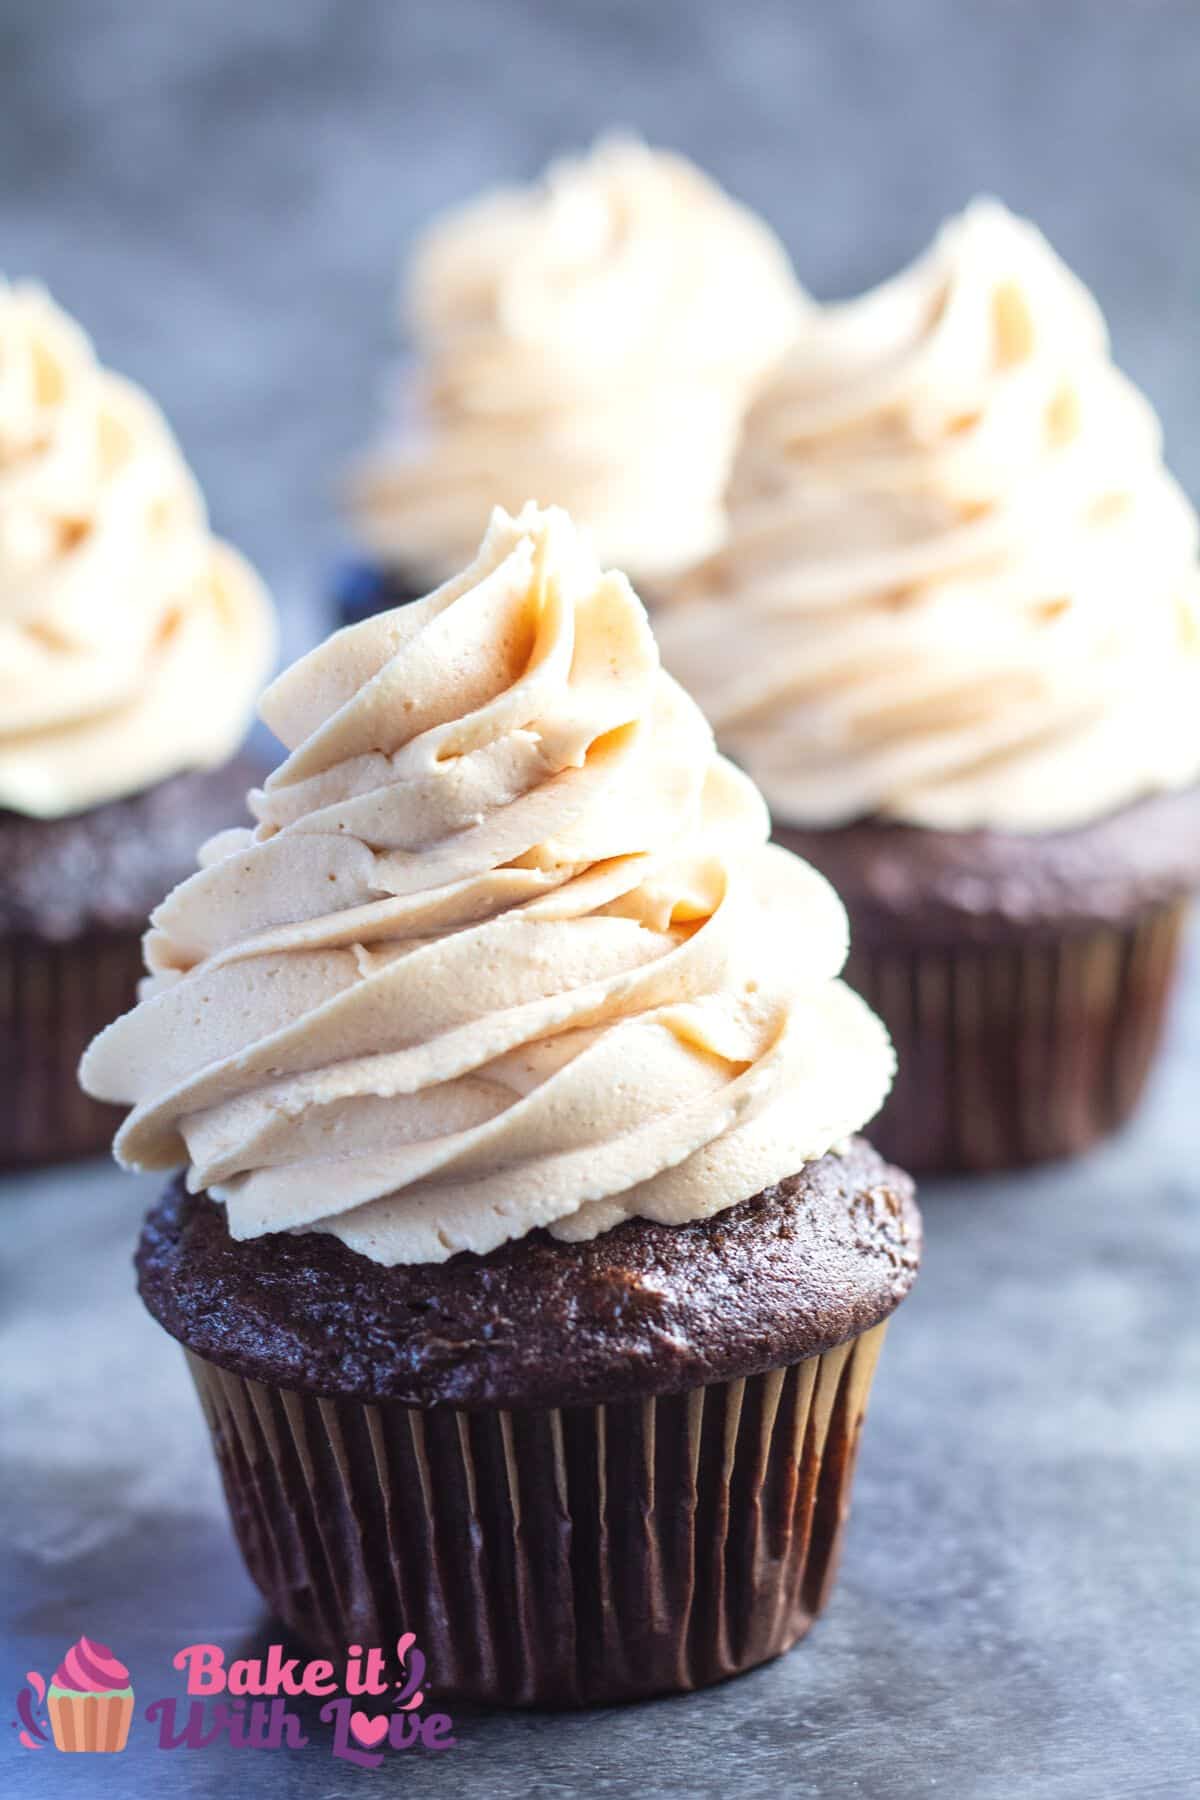 Tall image of a split open peanut butter filled chocolate cupcake.